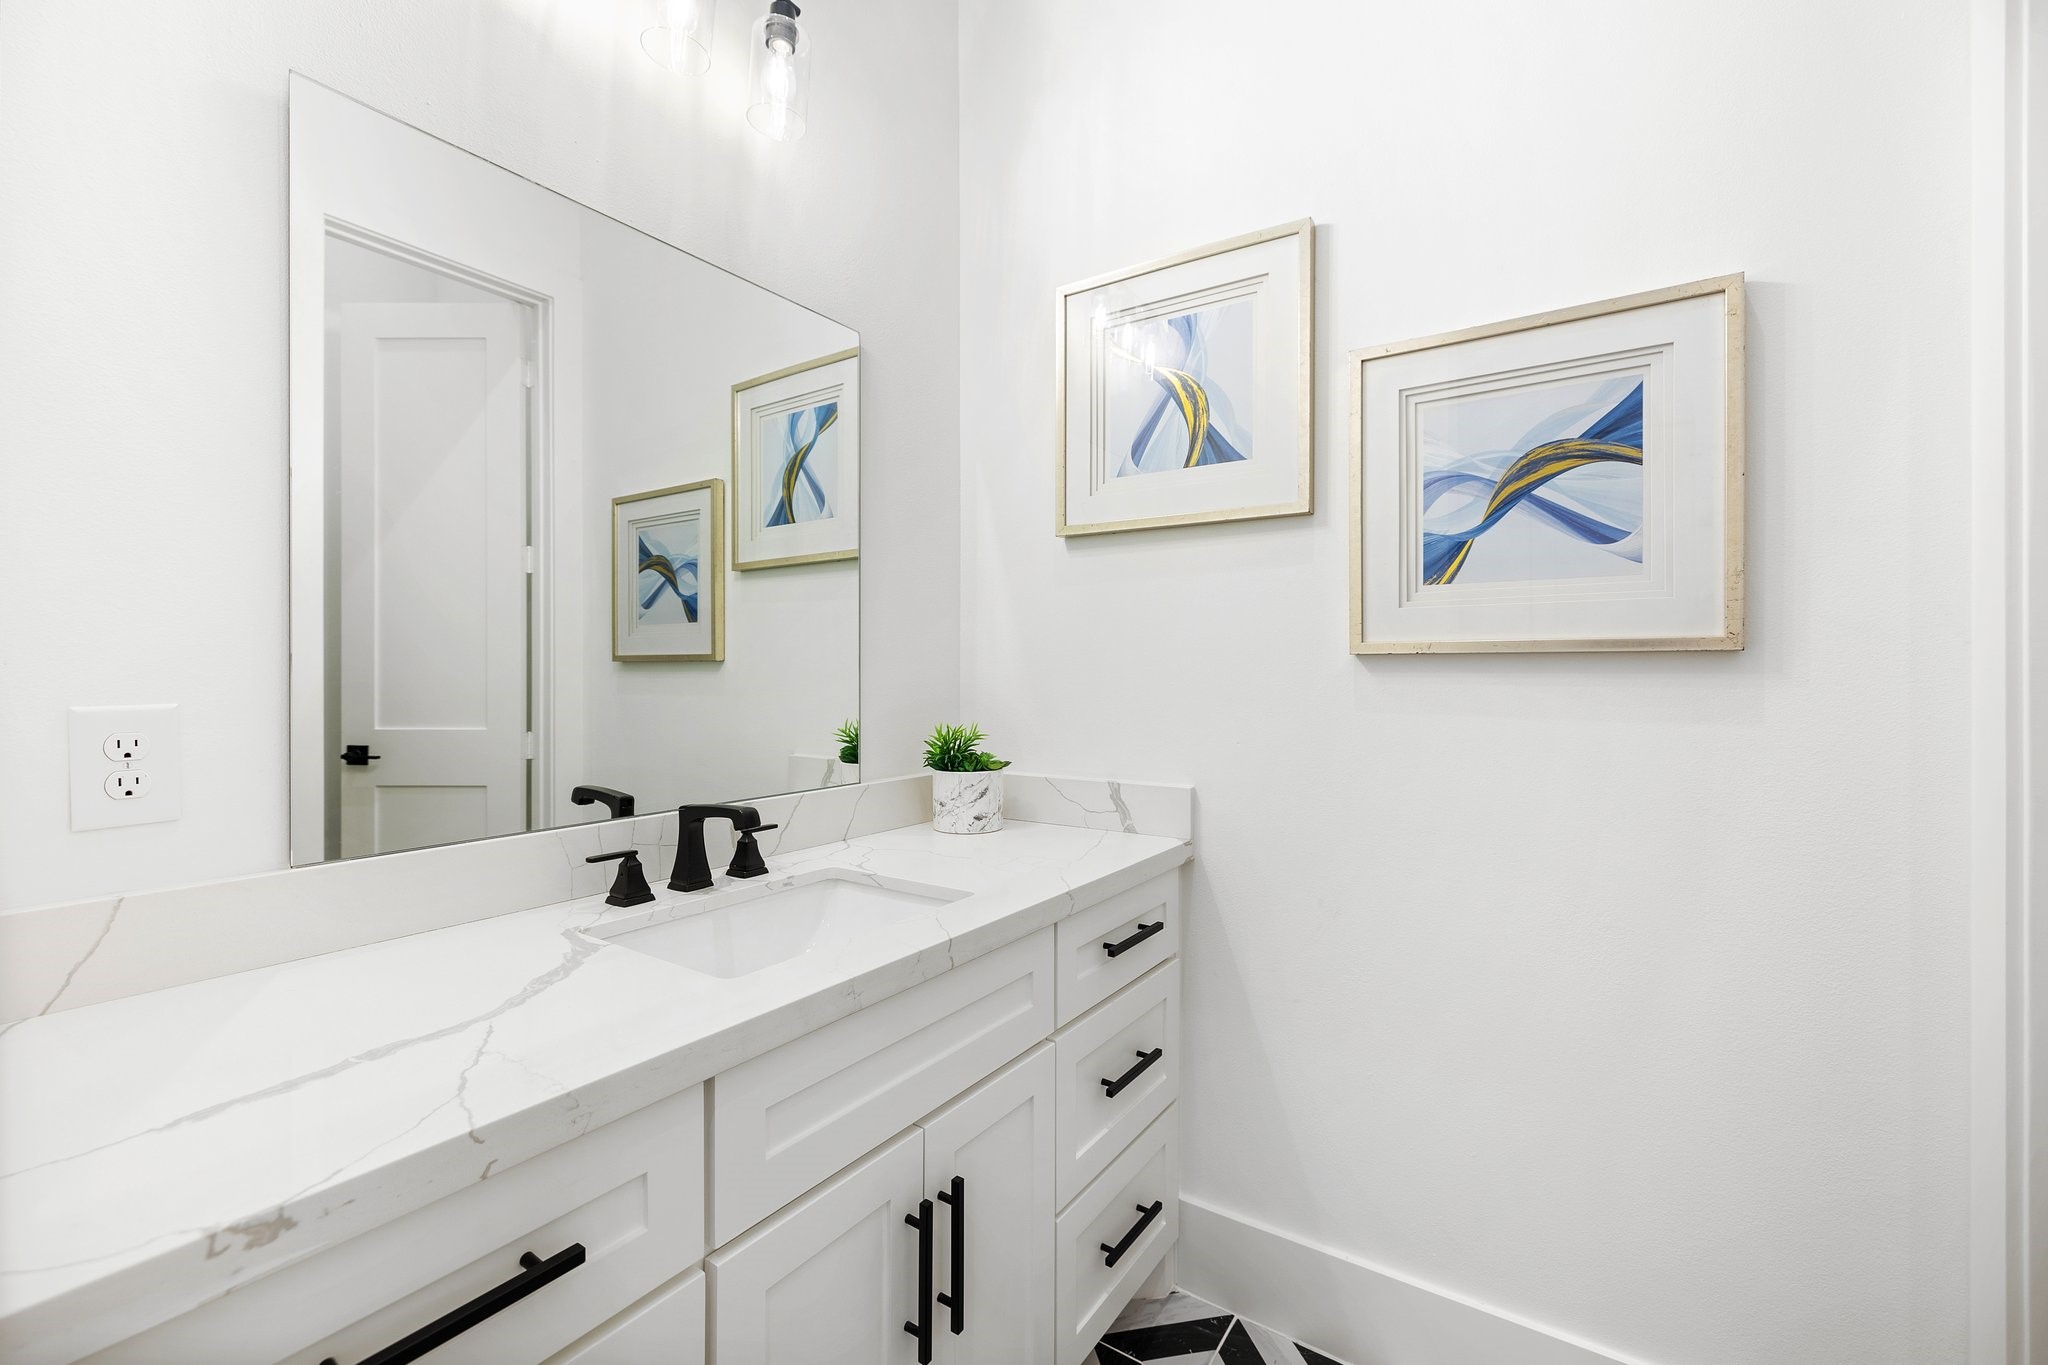 The stylish downstairs powder bathroom is adorned with chic black and white tiles, creating a modern yet timeless ambiance. The thoughtful design extends to a separate lavatory, providing added privacy.